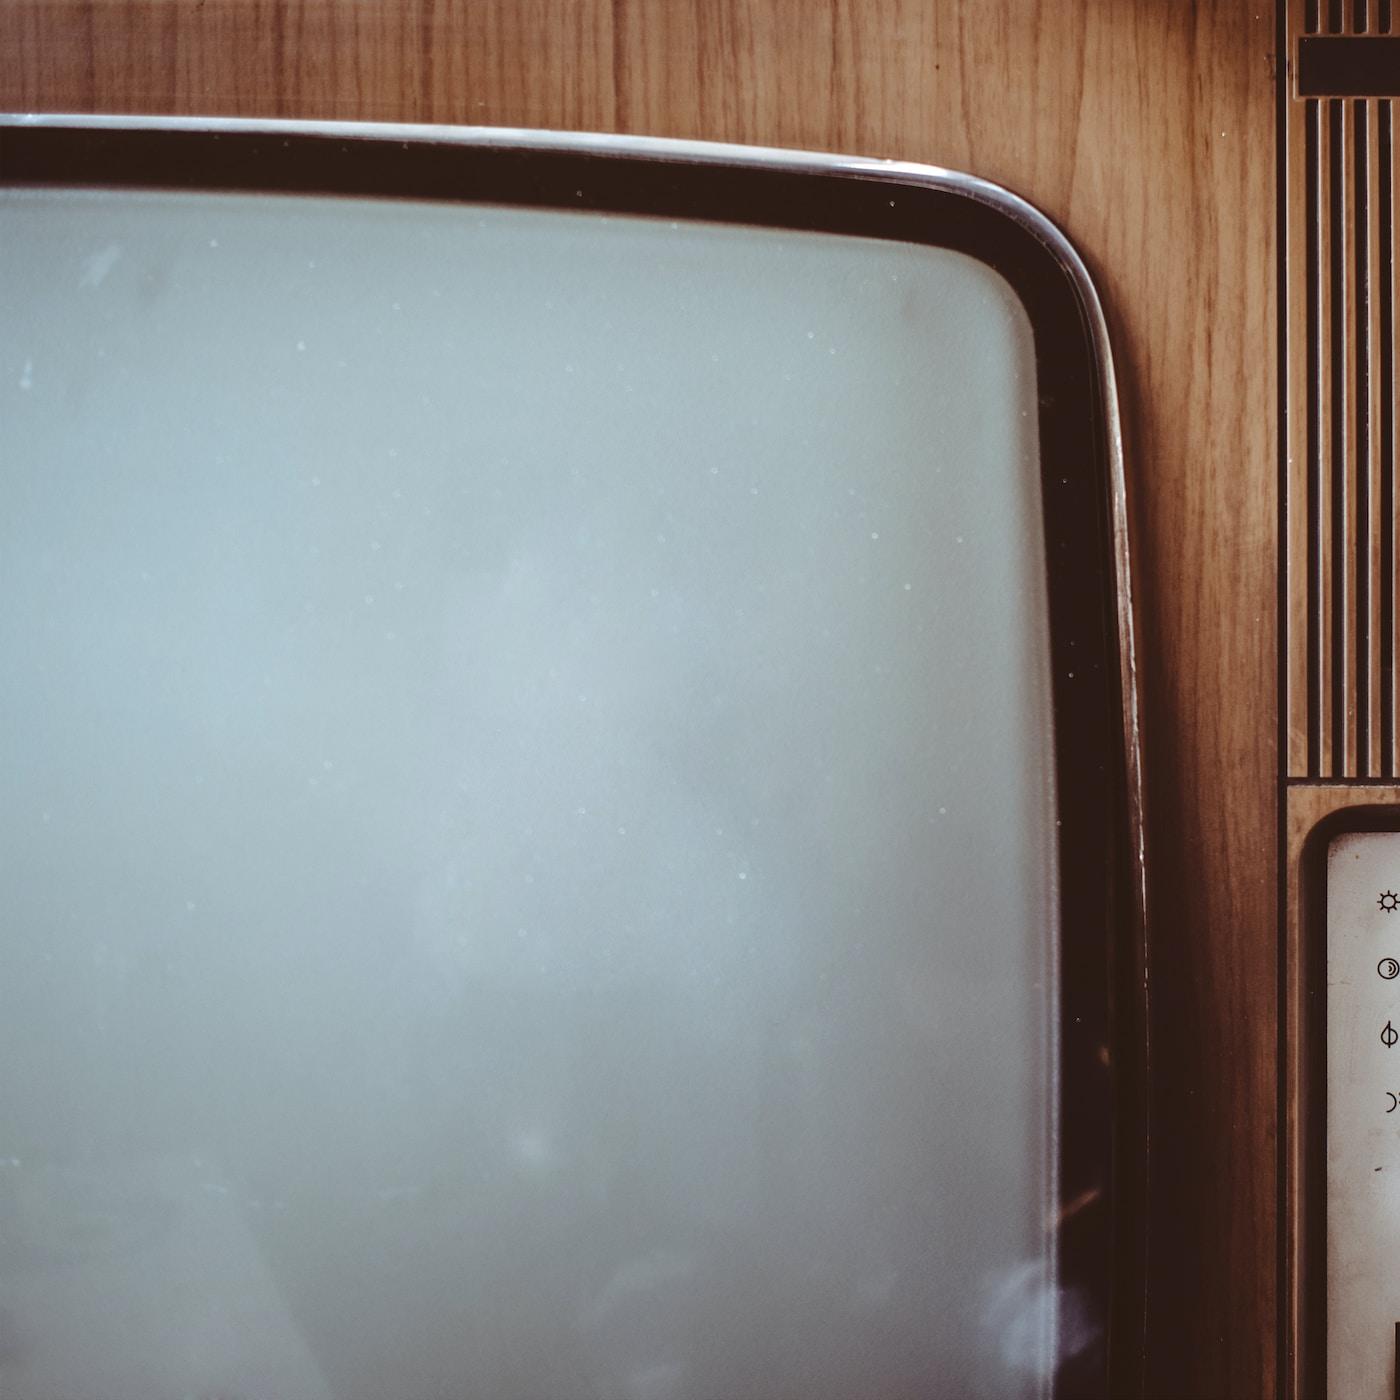 7 Ways to Watch Less Television ...